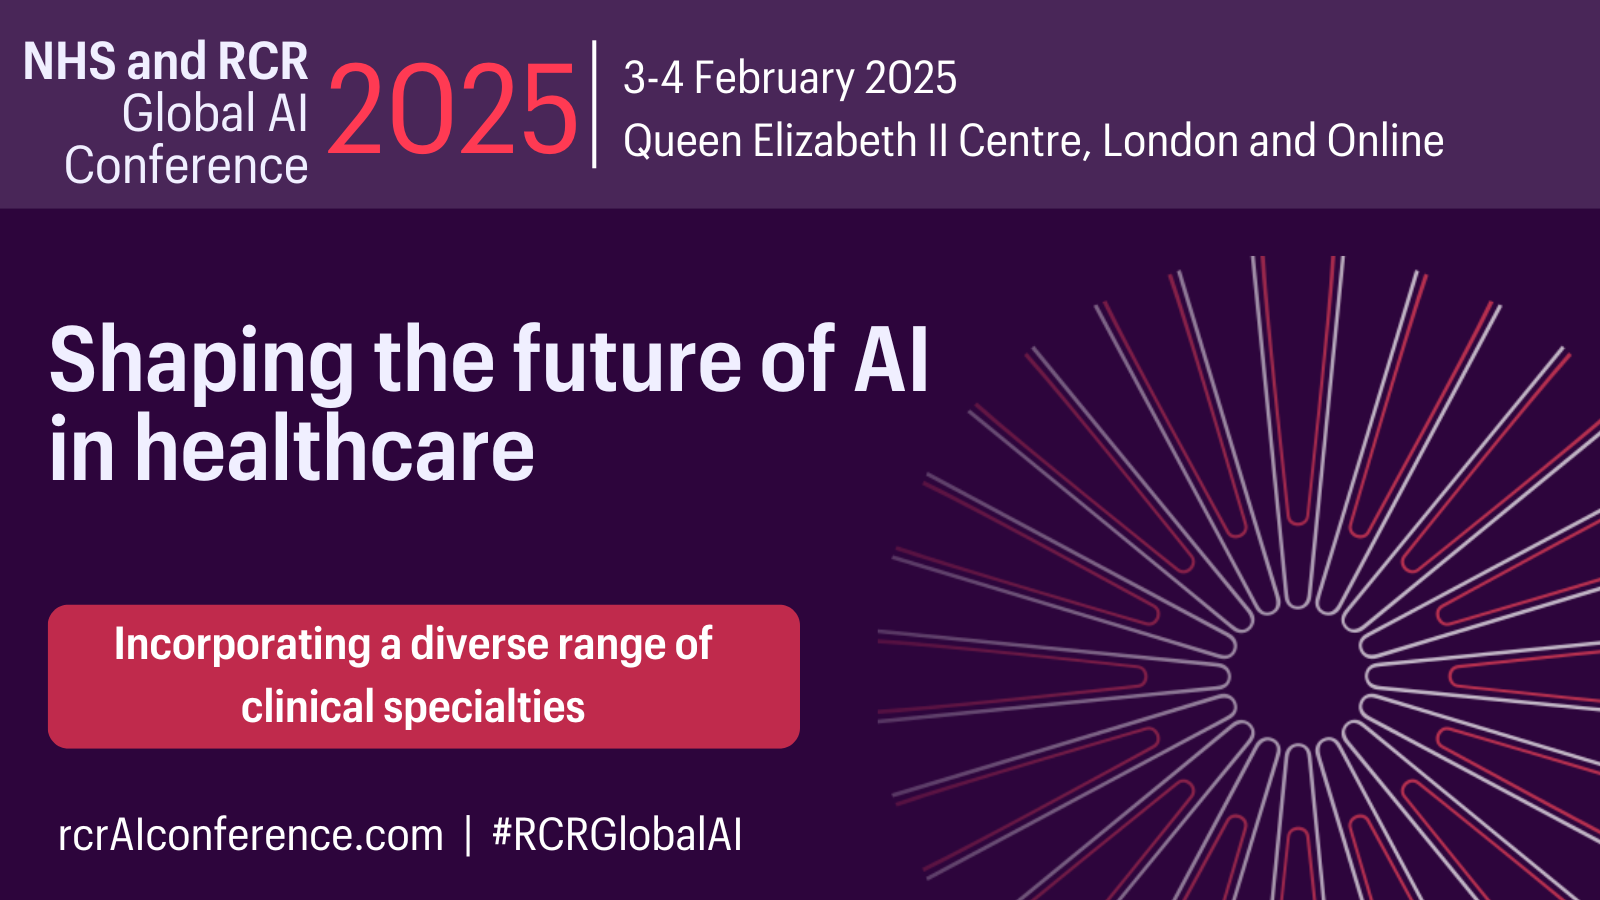 NHS and RCR Global AI Conference 2025